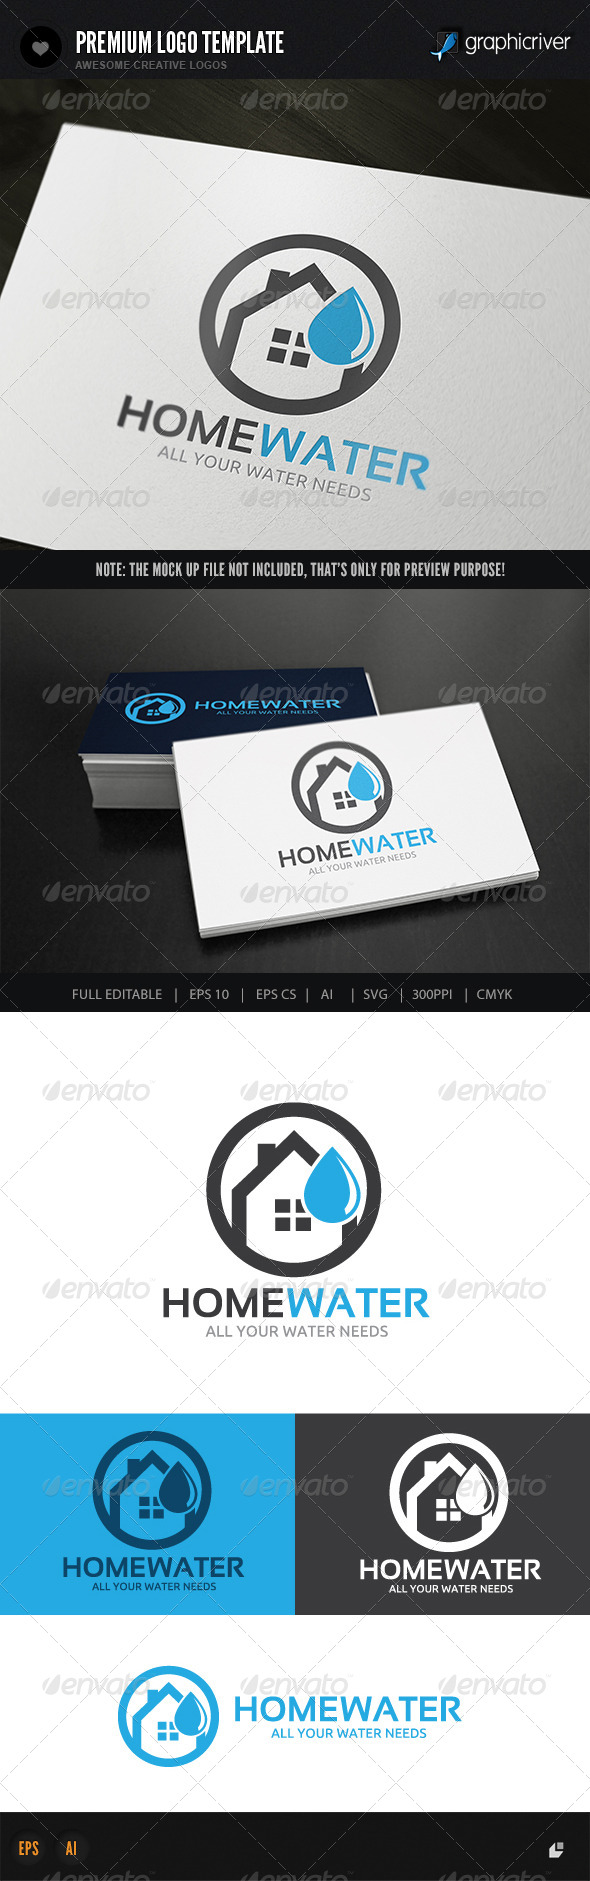 Home Water Services